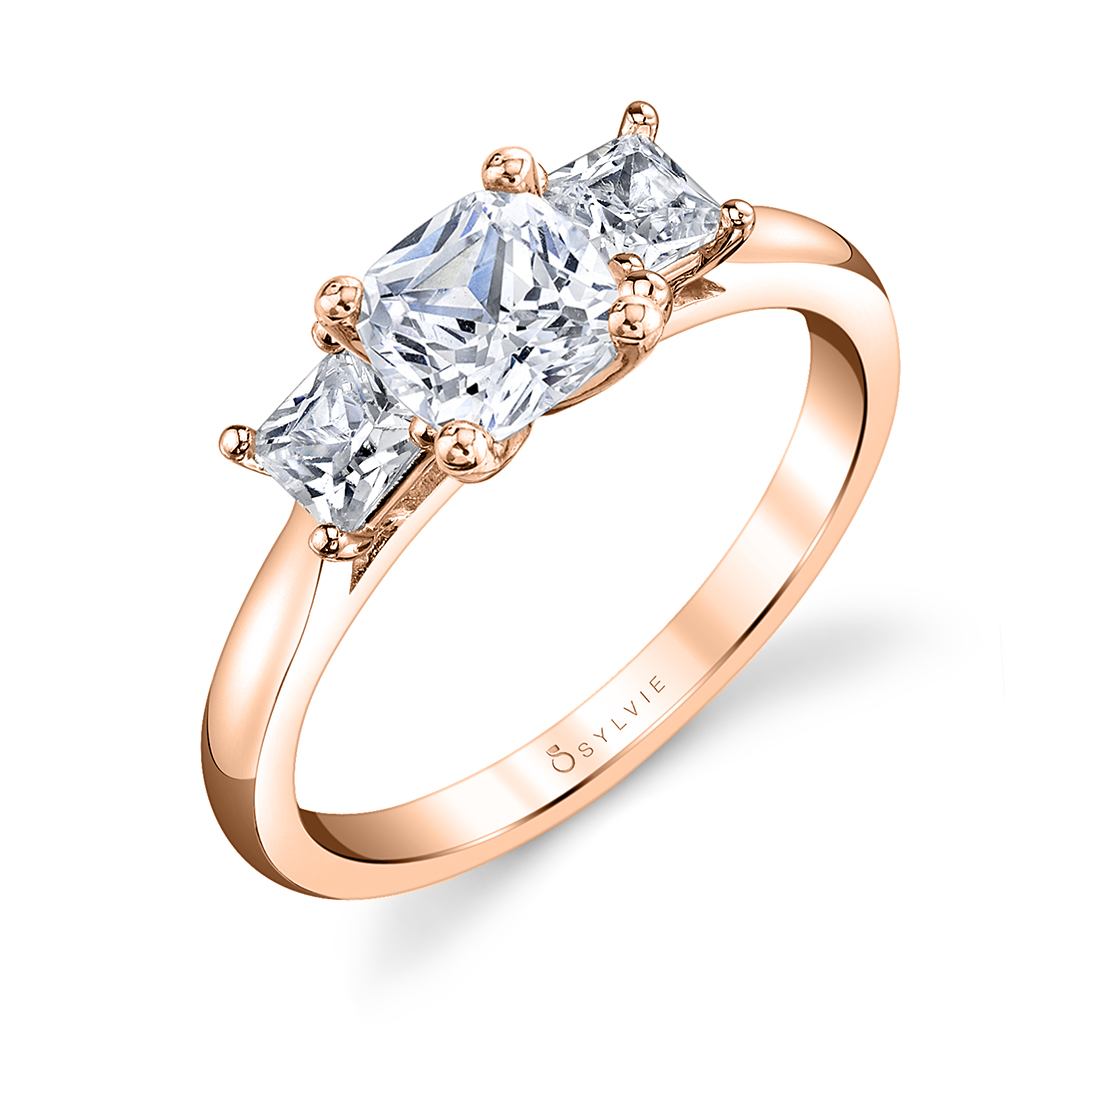 3 stone cushion cut engagement ring in rose gold